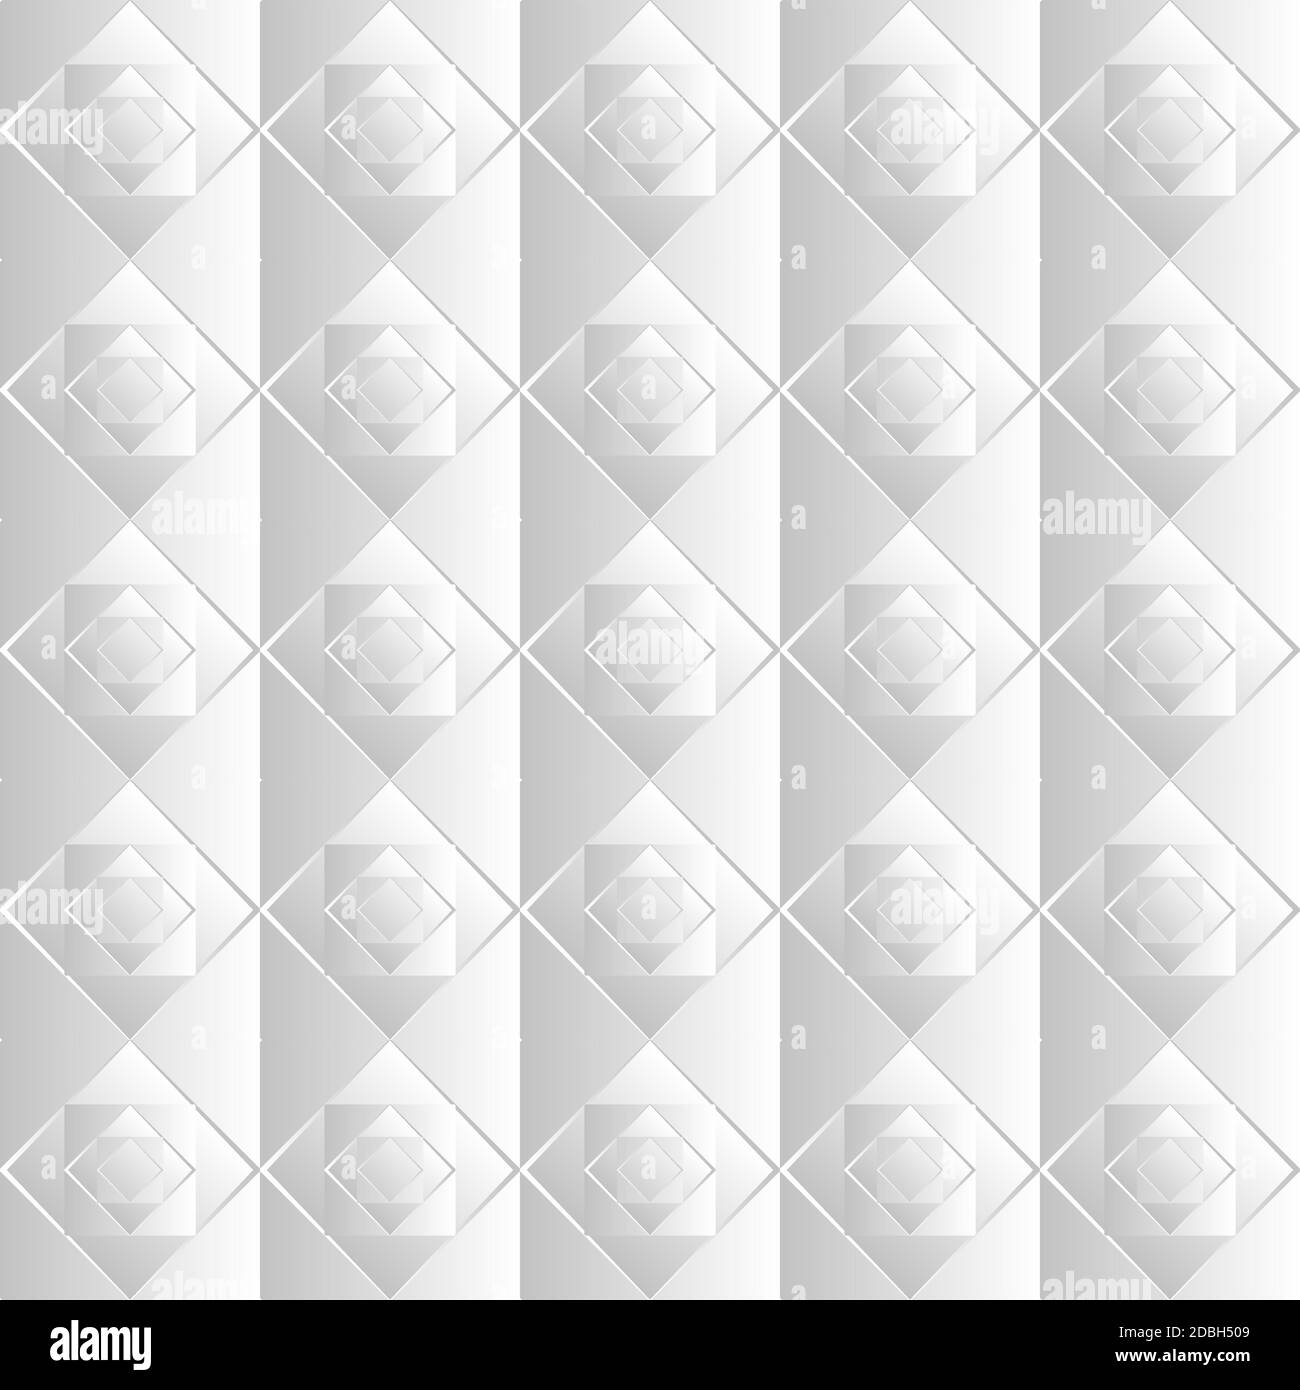 Seamless pattern from rhombuses in paper cut style. Vector illustration Stock Vector